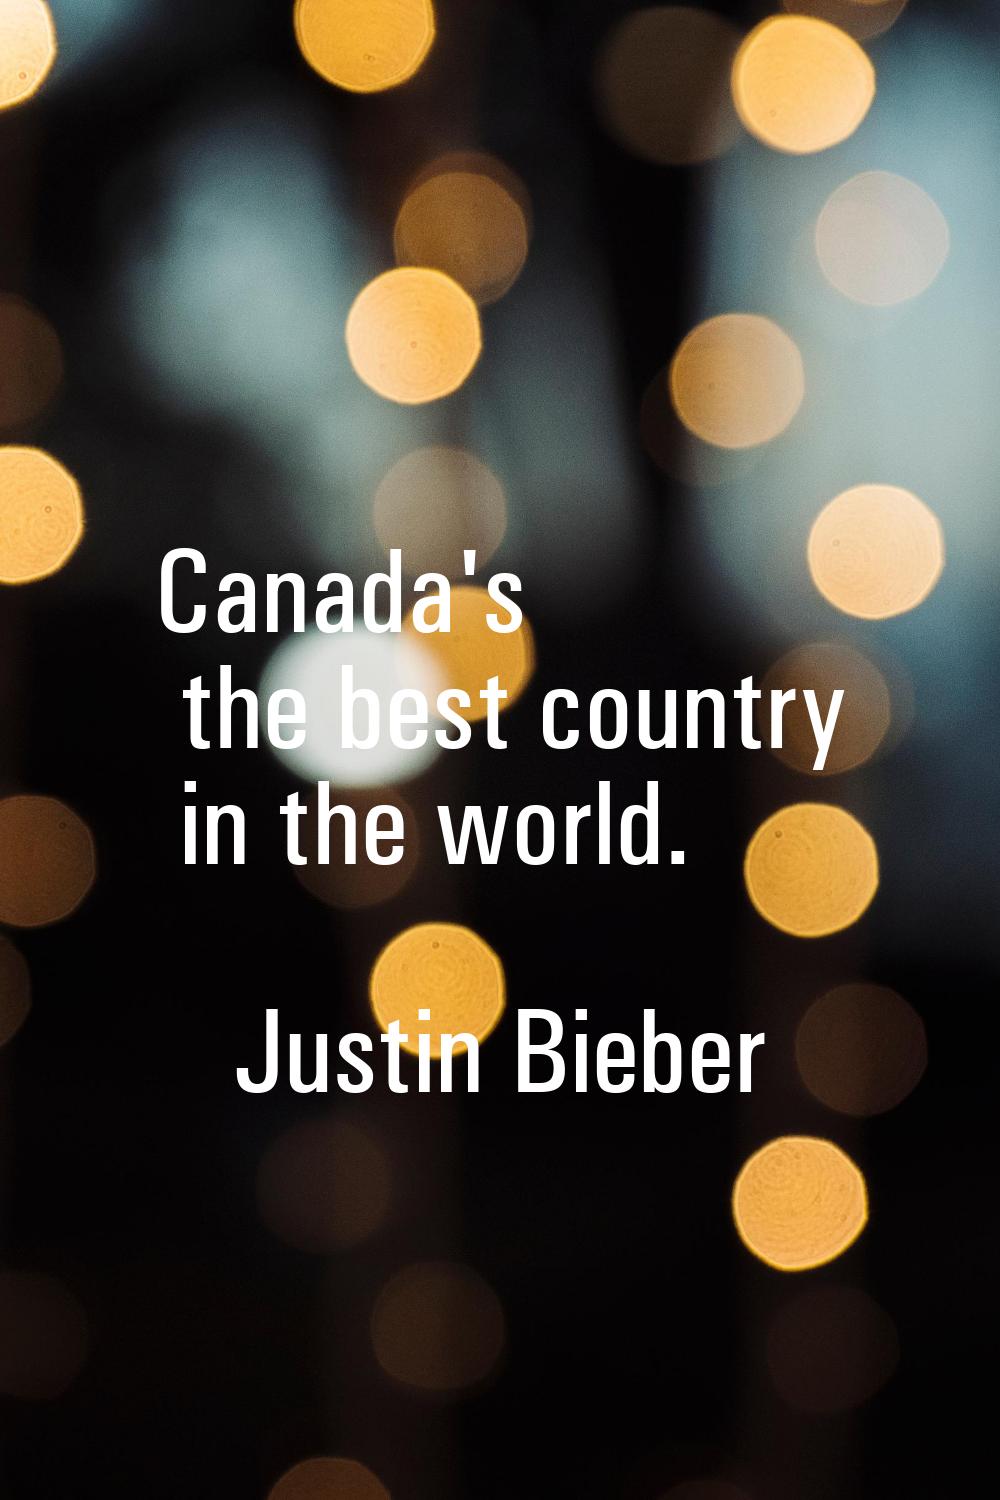 Canada's the best country in the world.